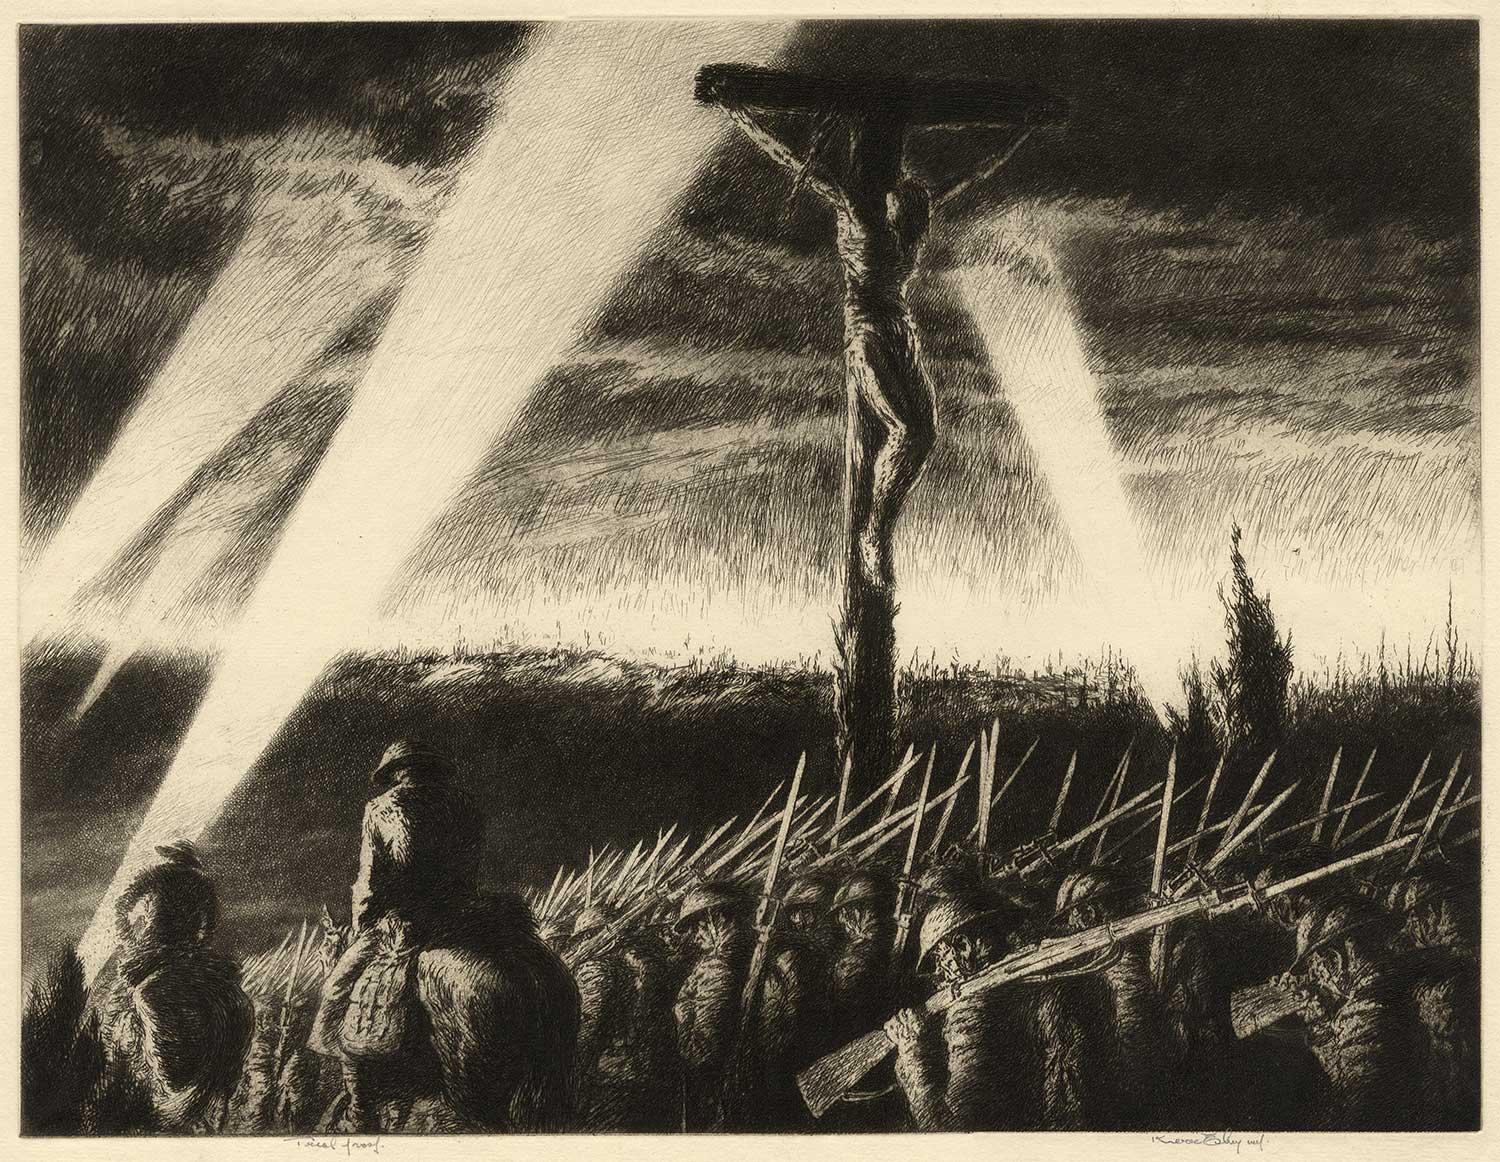 Barrage (Eby parallels WWI soldiers sacrifice with sacrifice of Christ on cross) - Black Landscape Print by Kerr Eby